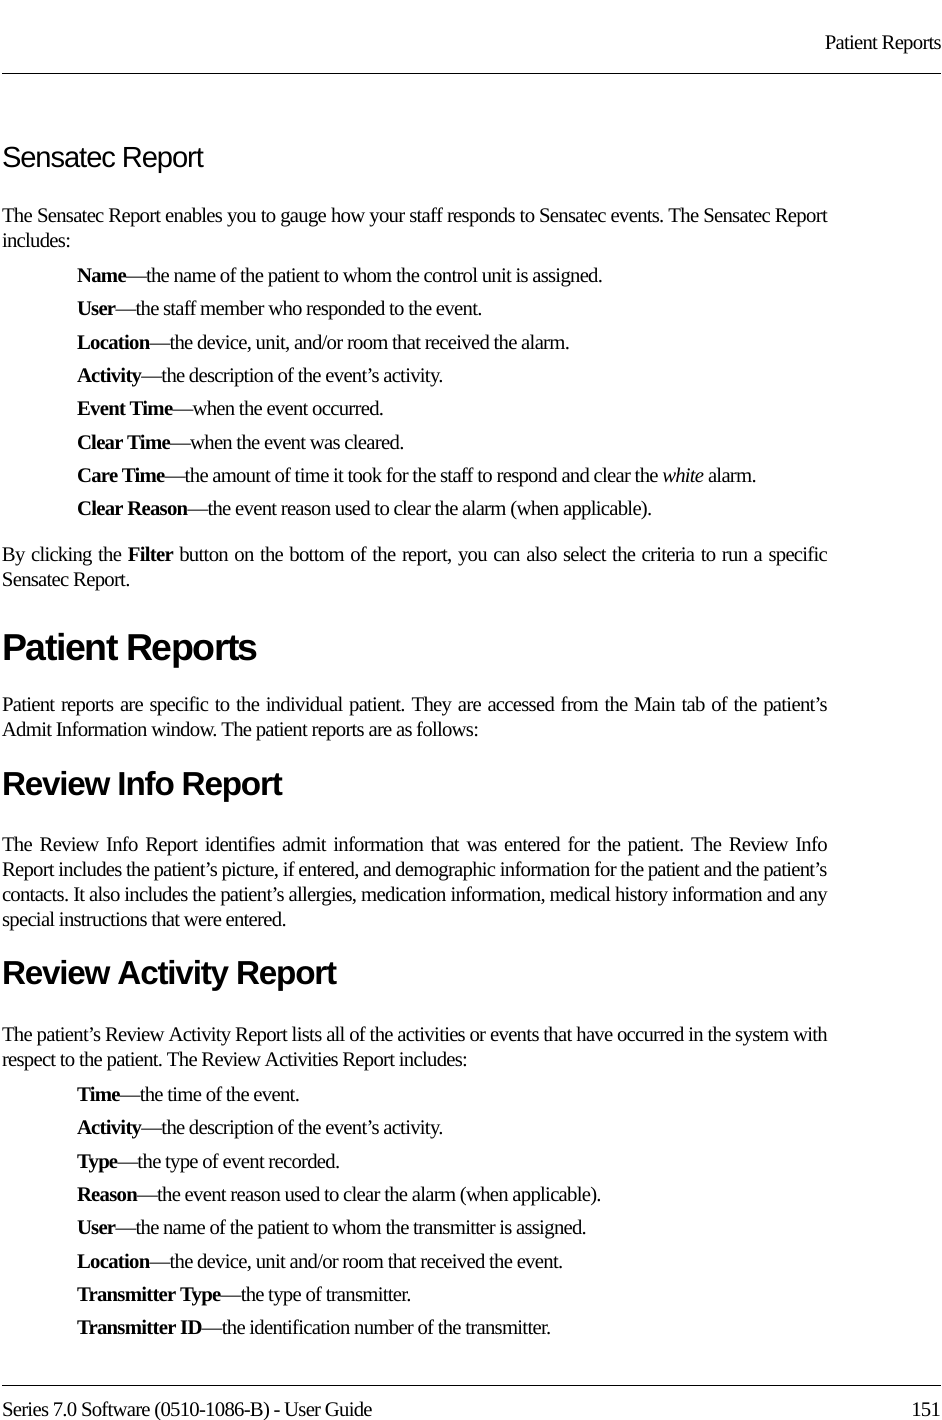 Series 7.0 Software (0510-1086-B) - User Guide  151Patient ReportsSensatec ReportThe Sensatec Report enables you to gauge how your staff responds to Sensatec events. The Sensatec Report includes:Name—the name of the patient to whom the control unit is assigned. User—the staff member who responded to the event.Location—the device, unit, and/or room that received the alarm.Activity—the description of the event’s activity.Event Time—when the event occurred.Clear Time—when the event was cleared.Care Time—the amount of time it took for the staff to respond and clear the white alarm.Clear Reason—the event reason used to clear the alarm (when applicable).By clicking the Filter button on the bottom of the report, you can also select the criteria to run a specific Sensatec Report.Patient ReportsPatient reports are specific to the individual patient. They are accessed from the Main tab of the patient’s Admit Information window. The patient reports are as follows:Review Info ReportThe Review Info Report identifies admit information that was entered for the patient. The Review Info Report includes the patient’s picture, if entered, and demographic information for the patient and the patient’s contacts. It also includes the patient’s allergies, medication information, medical history information and any special instructions that were entered.Review Activity ReportThe patient’s Review Activity Report lists all of the activities or events that have occurred in the system with respect to the patient. The Review Activities Report includes:Time—the time of the event.Activity—the description of the event’s activity.Type—the type of event recorded.Reason—the event reason used to clear the alarm (when applicable).User—the name of the patient to whom the transmitter is assigned. Location—the device, unit and/or room that received the event.Transmitter Type—the type of transmitter.Transmitter ID—the identification number of the transmitter.